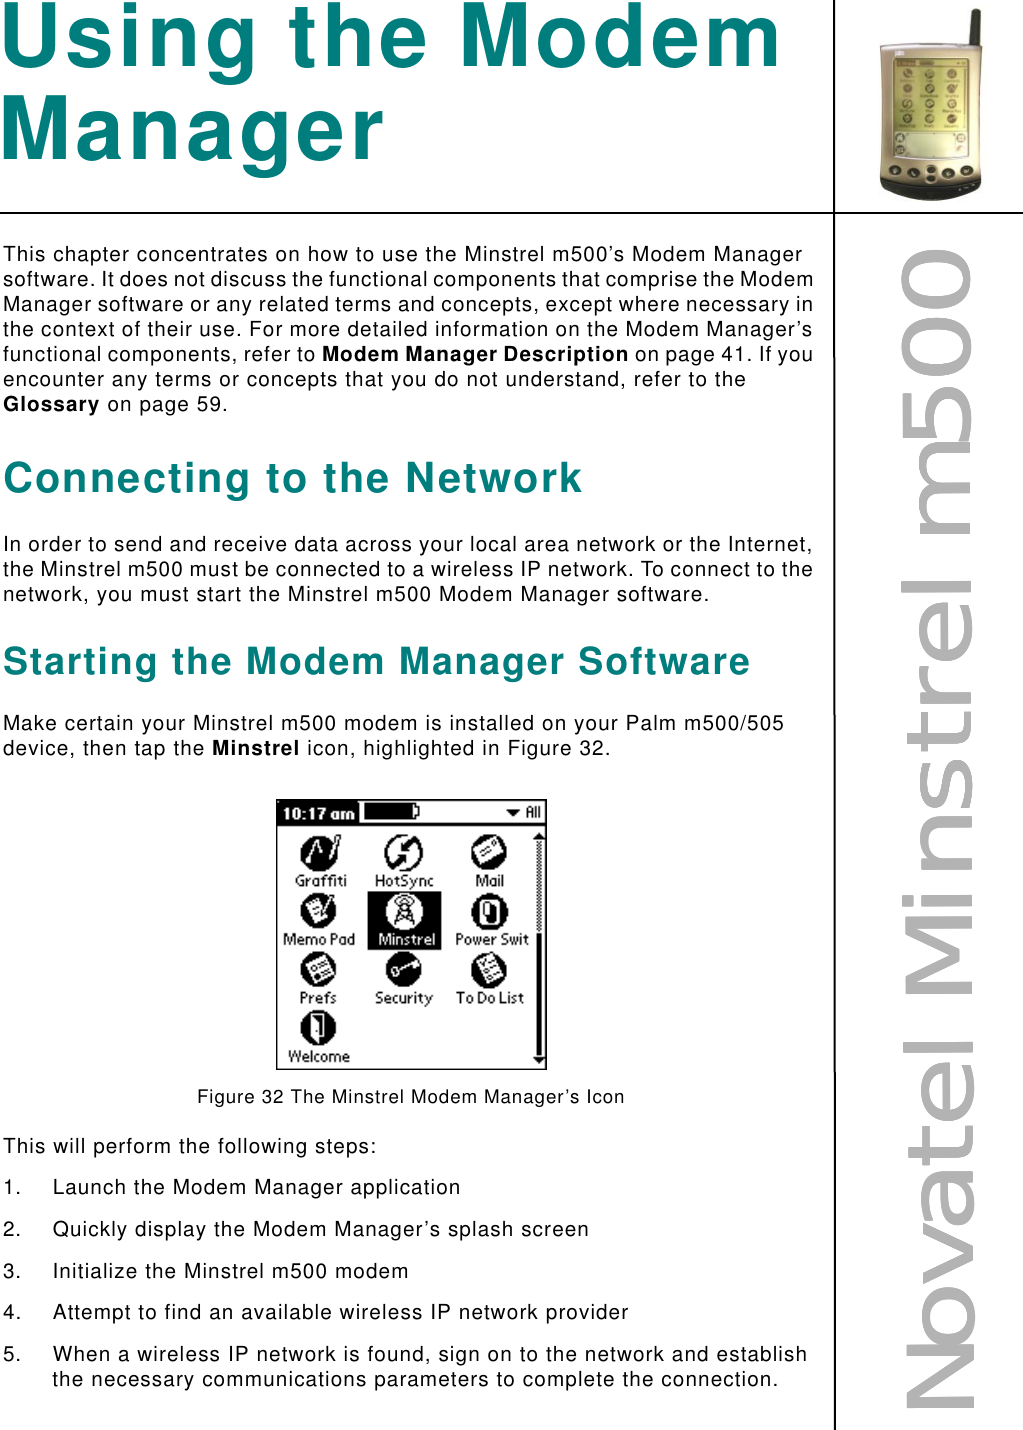 NNNNoooovvvvaaaatttteeeellll    MMMMiiiinnnnssssttttrrrreeeellll    mmmm555500000000Using the Modem ManagerThis chapter concentrates on how to use the Minstrel m500’s Modem Manager software. It does not discuss the functional components that comprise the Modem Manager software or any related terms and concepts, except where necessary in the context of their use. For more detailed information on the Modem Manager’s functional components, refer to Modem Manager Description on page 41. If you encounter any terms or concepts that you do not understand, refer to the Glossary on page 59.Connecting to the NetworkIn order to send and receive data across your local area network or the Internet, the Minstrel m500 must be connected to a wireless IP network. To connect to the network, you must start the Minstrel m500 Modem Manager software.Starting the Modem Manager SoftwareMake certain your Minstrel m500 modem is installed on your Palm m500/505 device, then tap the Minstrel icon, highlighted in Figure 32.Figure 32 The Minstrel Modem Manager’s IconThis will perform the following steps:1. Launch the Modem Manager application2. Quickly display the Modem Manager’s splash screen3. Initialize the Minstrel m500 modem4. Attempt to find an available wireless IP network provider5. When a wireless IP network is found, sign on to the network and establish the necessary communications parameters to complete the connection.